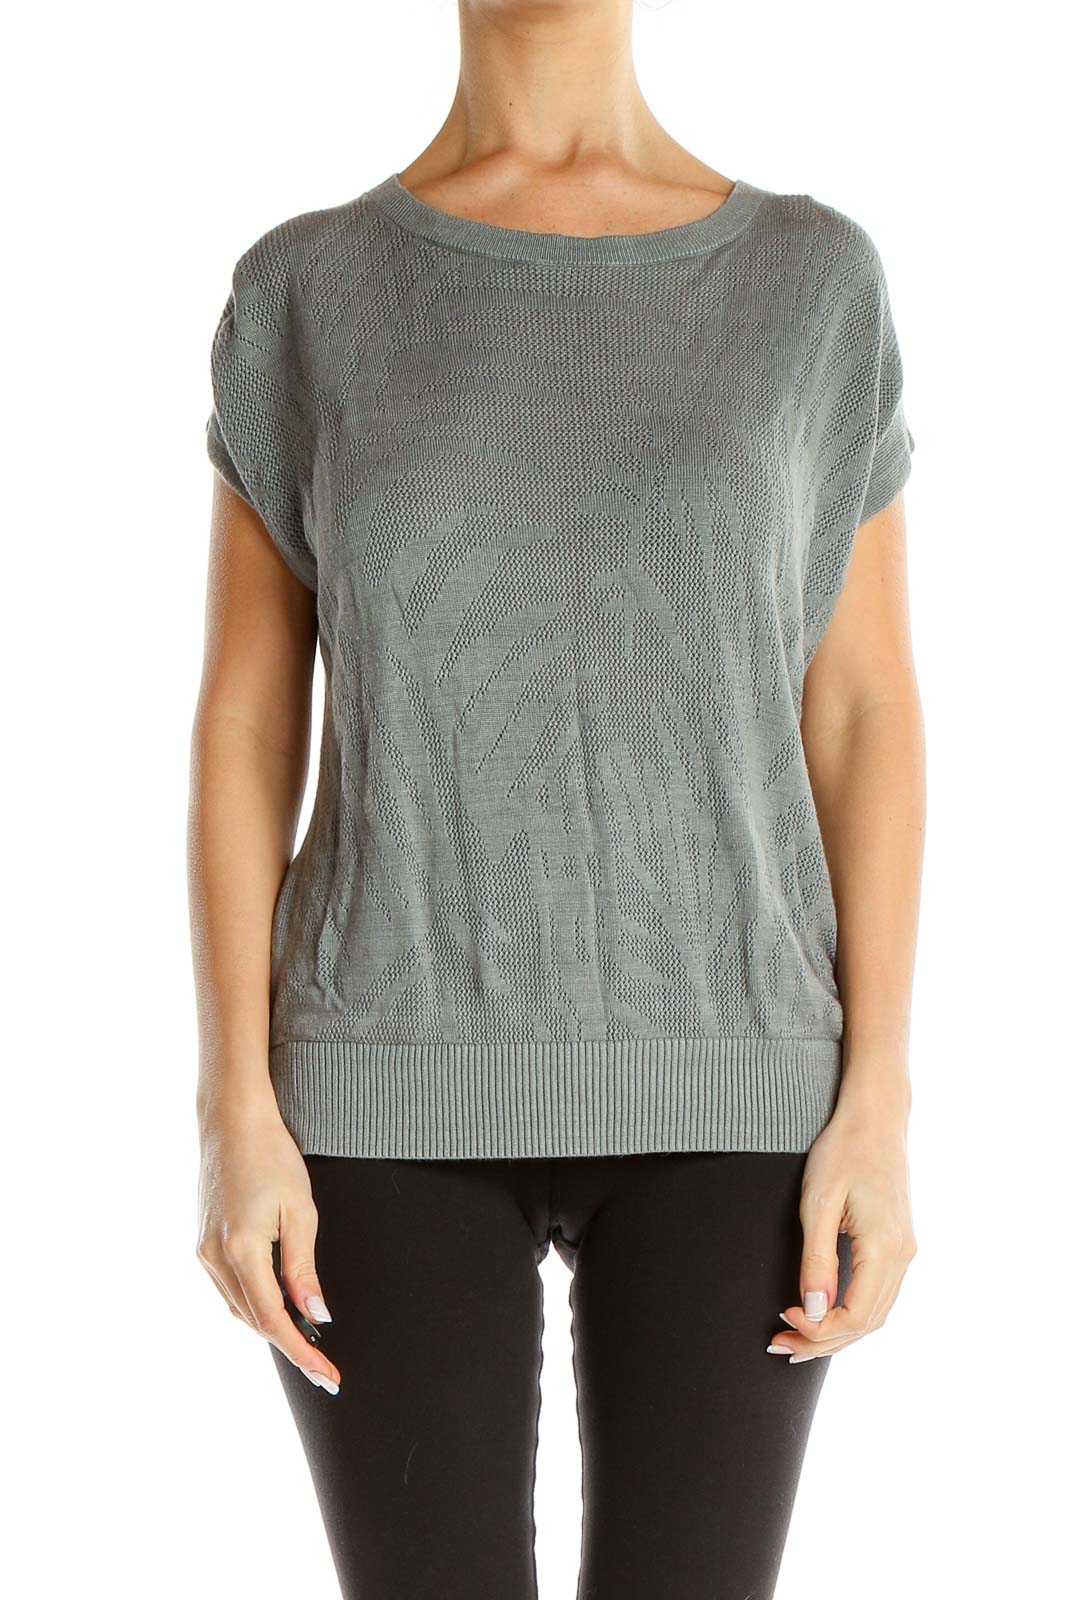 Gray Knitted Top Front